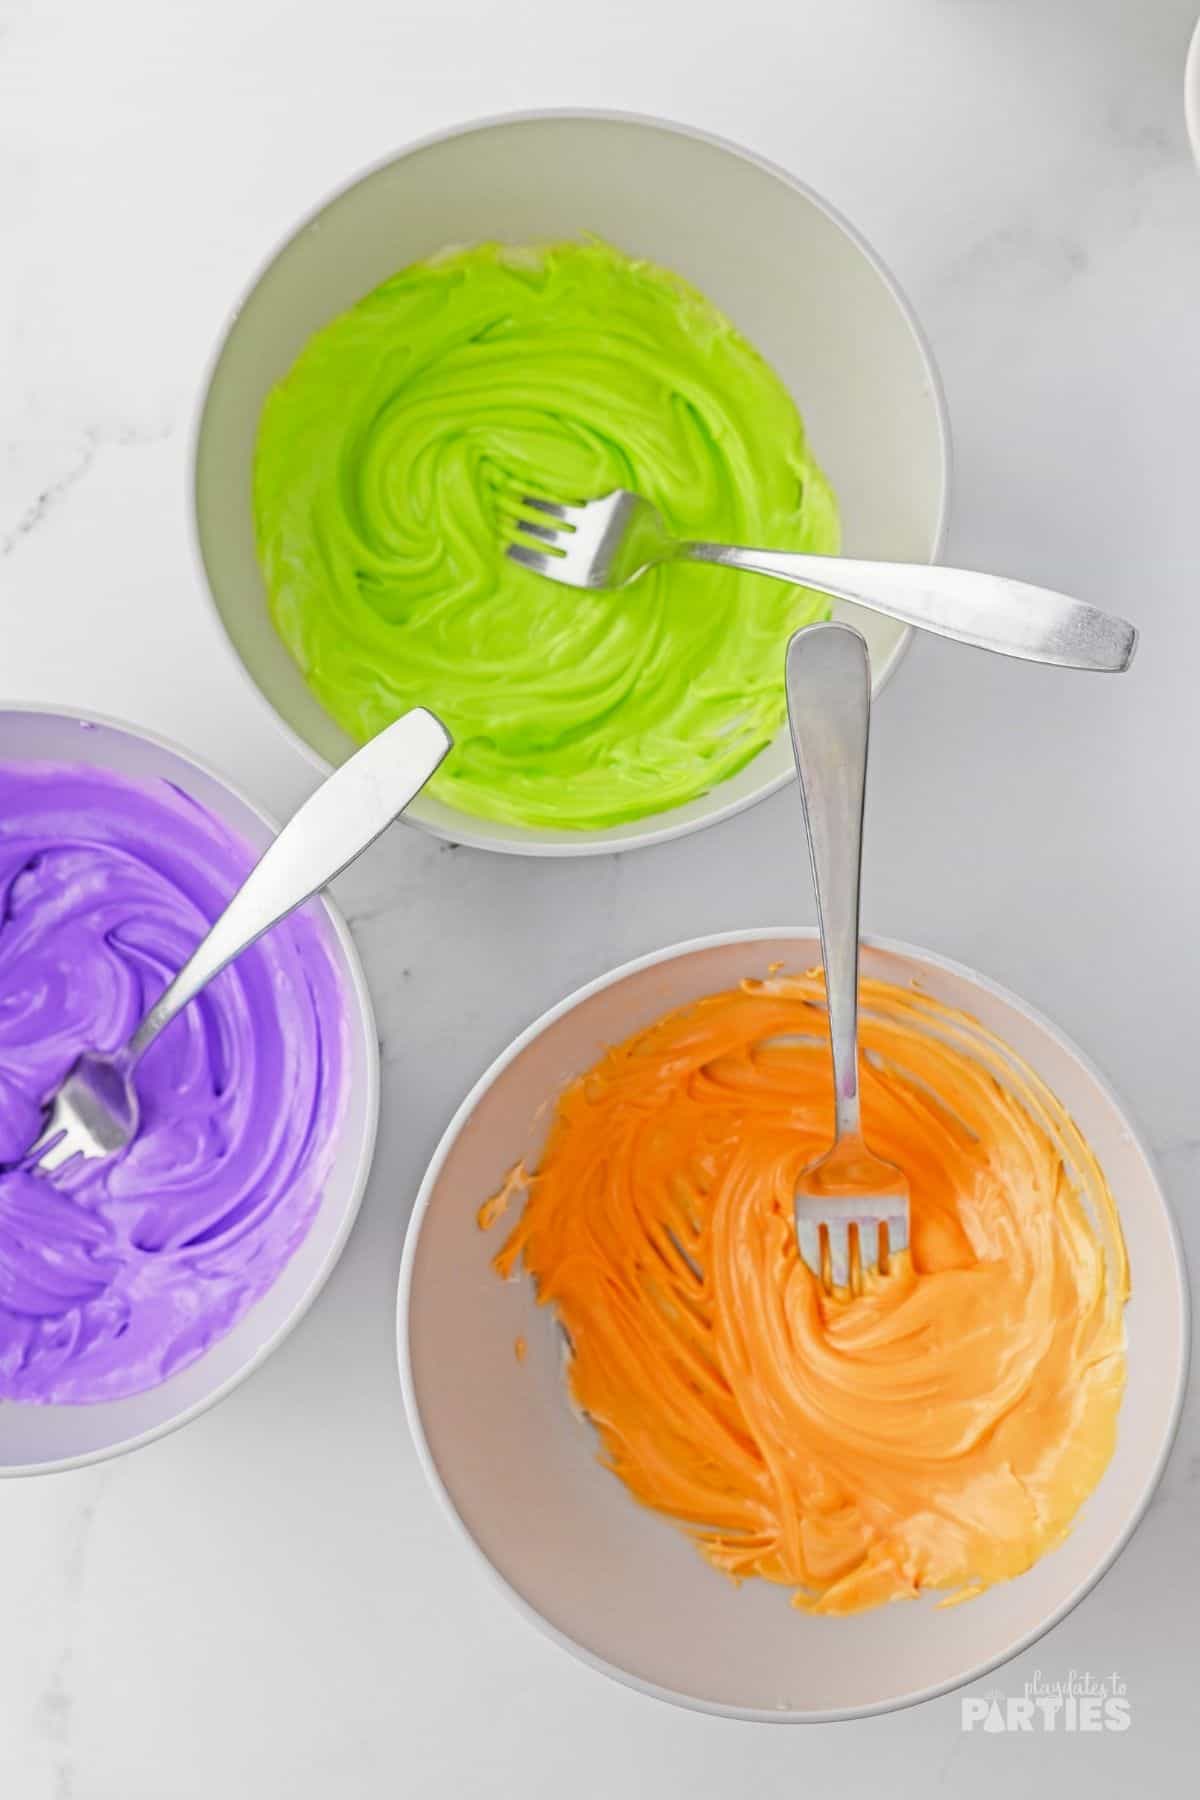 Icing colored orange, green, and purple.